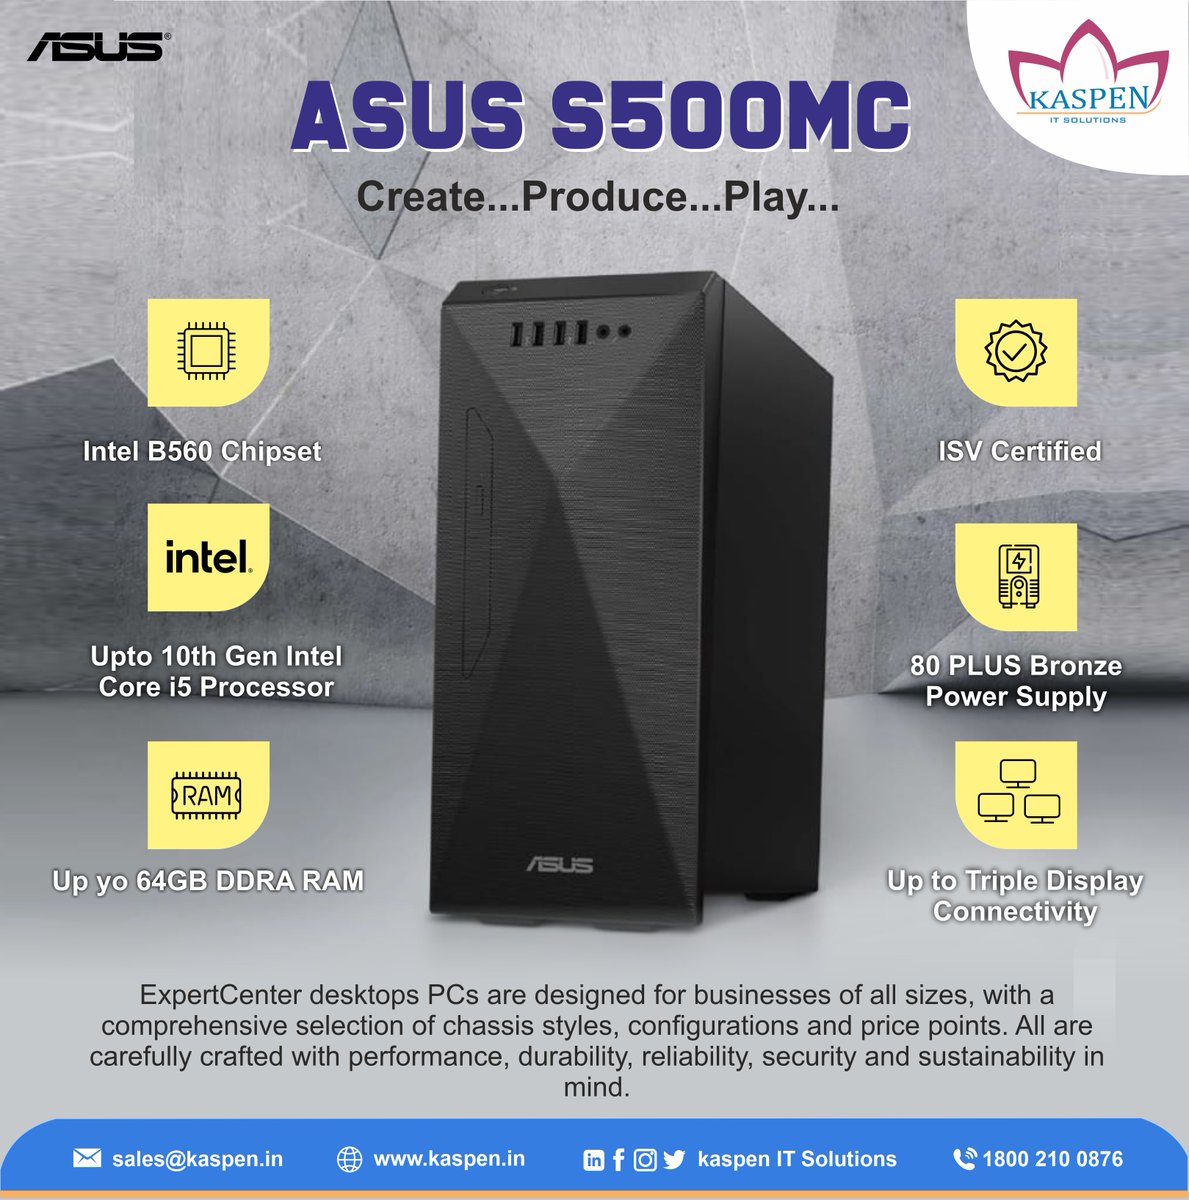 Get professional-grade work and gaming performance with the Asus S500MC. It has a powerful processor, graphics, and ample storage. Buy now at Kaspen IT Solutions. 
 
kaspen.in 

#kaspen #hardware #business #itsolutionsprovider #Asus #Laptop #dealer #Purchase #pc